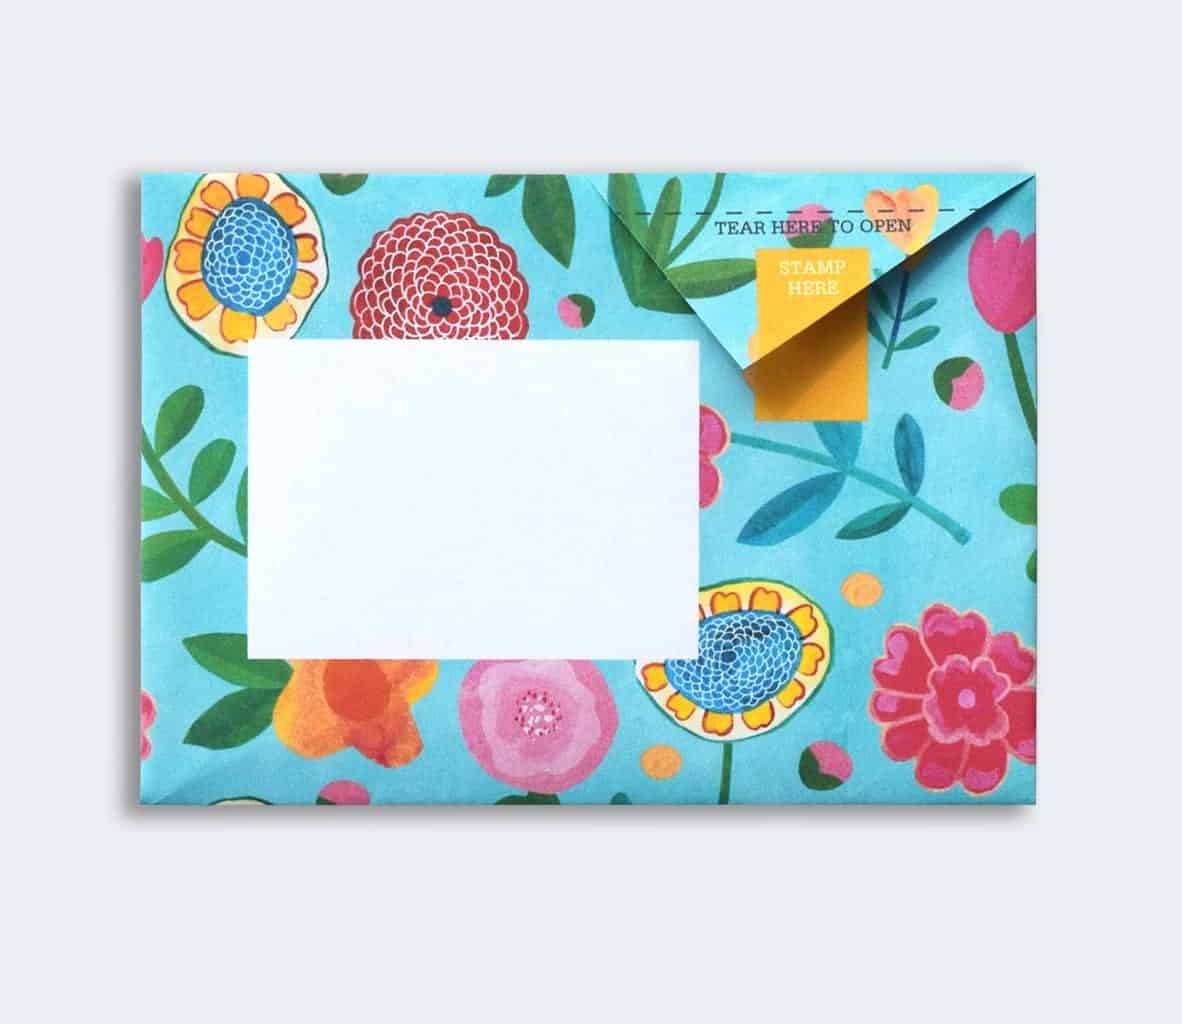 Wildflower  Pigeon Letter Set (Pack of 6)